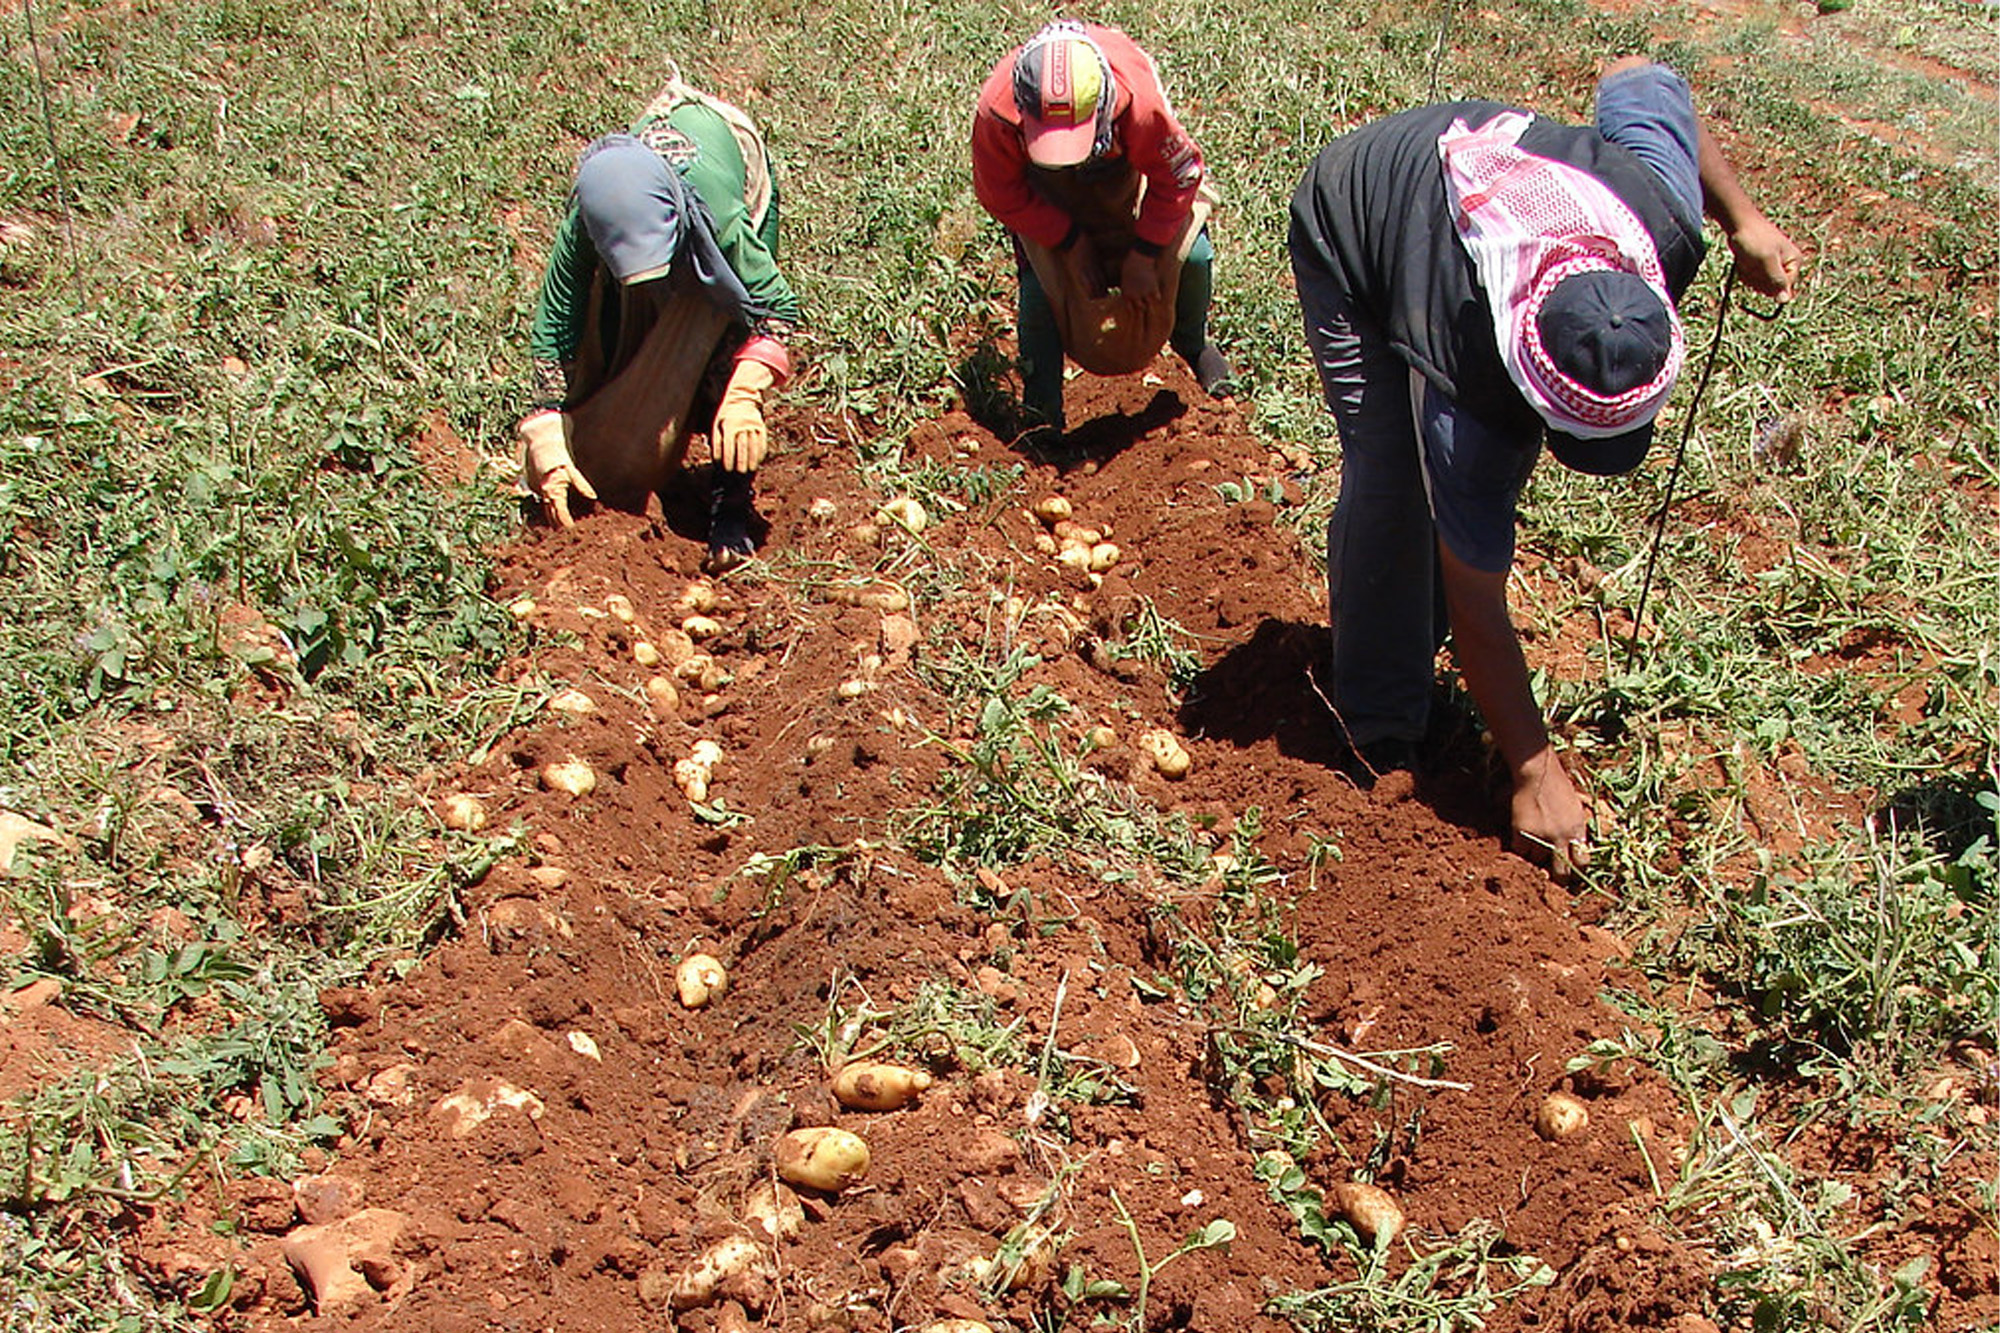 Potatoes play a crucial role in strategies to offer nutritious food and enhance livelihoods in rural areas and regions where natural resources are scarce and inputs are costly.